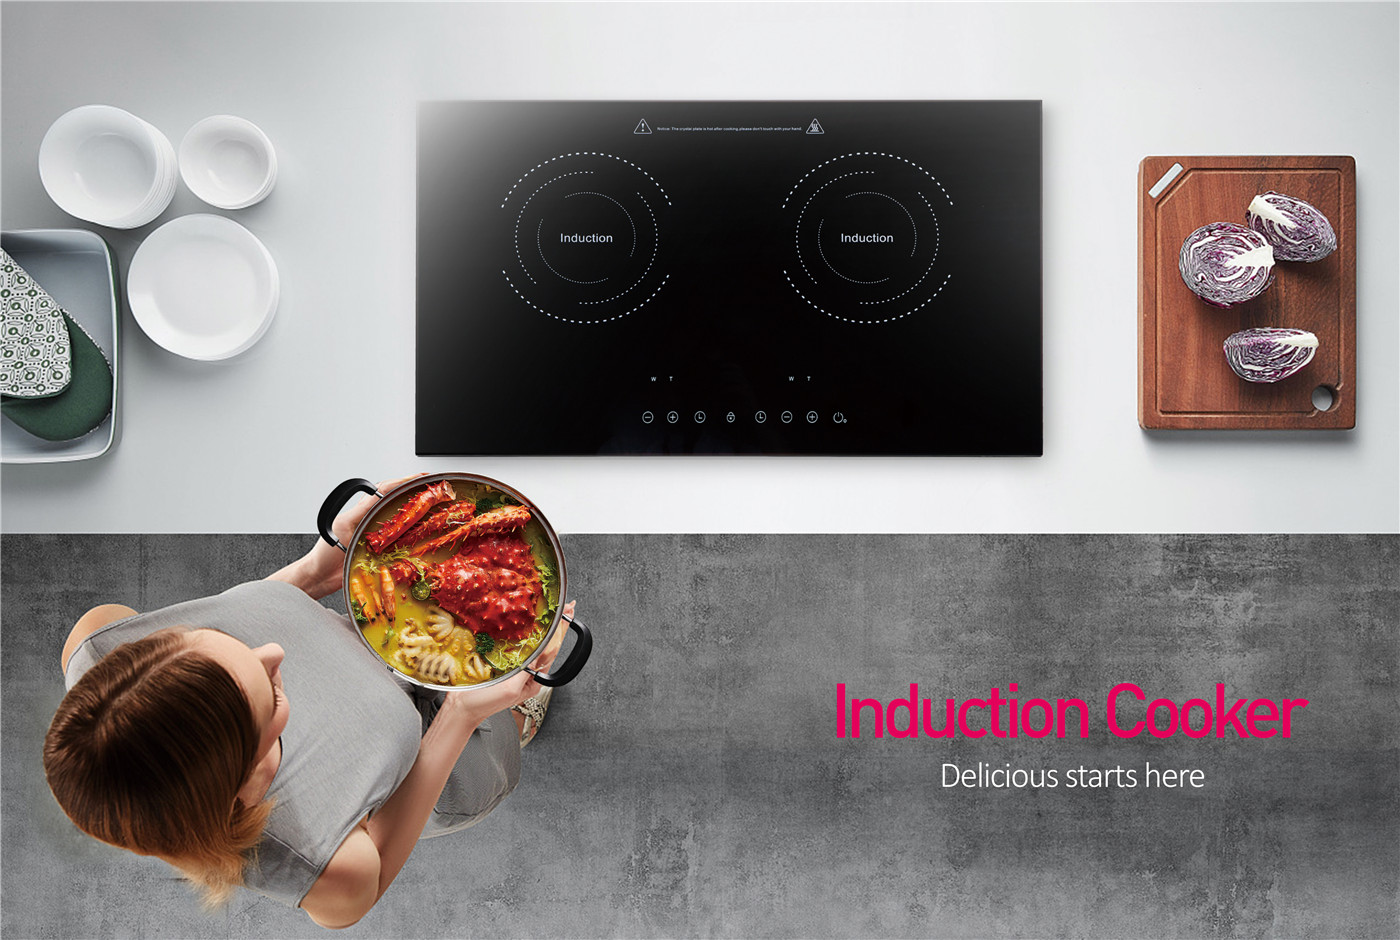 Durable Household Induction Cooker Multi-burner with Half-bridge Technology AM-D209H-01